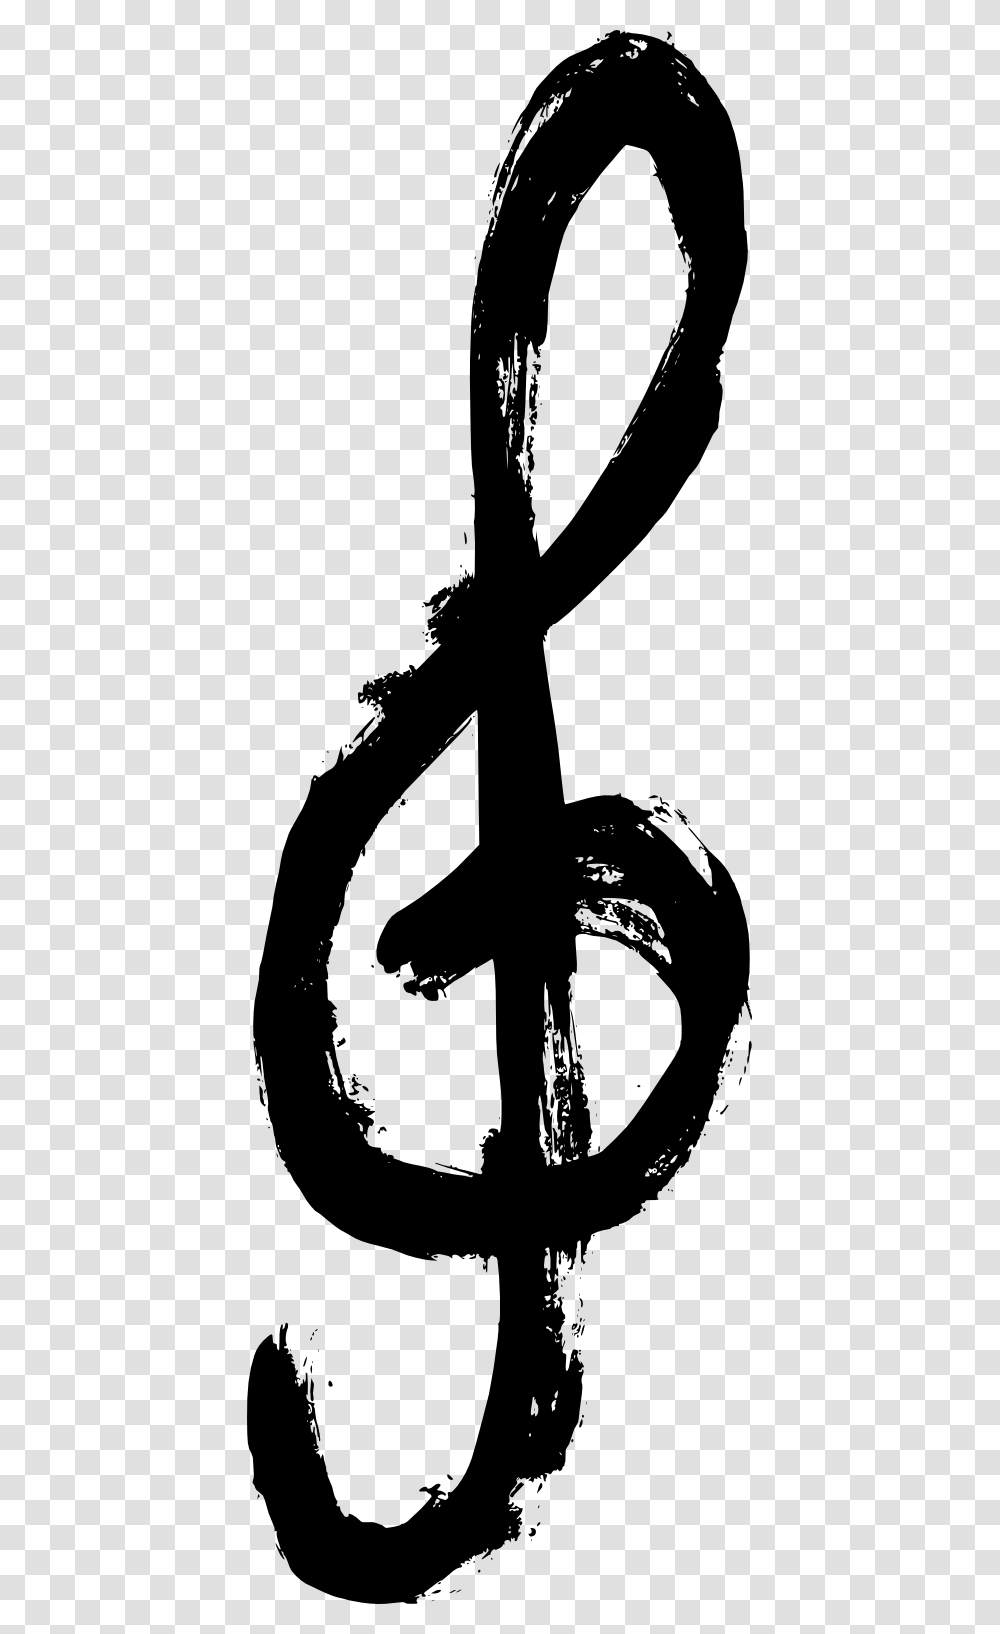 Musical Note Grunge Clip Art Music Symbols Background, Silhouette, Stencil, Leisure Activities, Musical Instrument Transparent Png